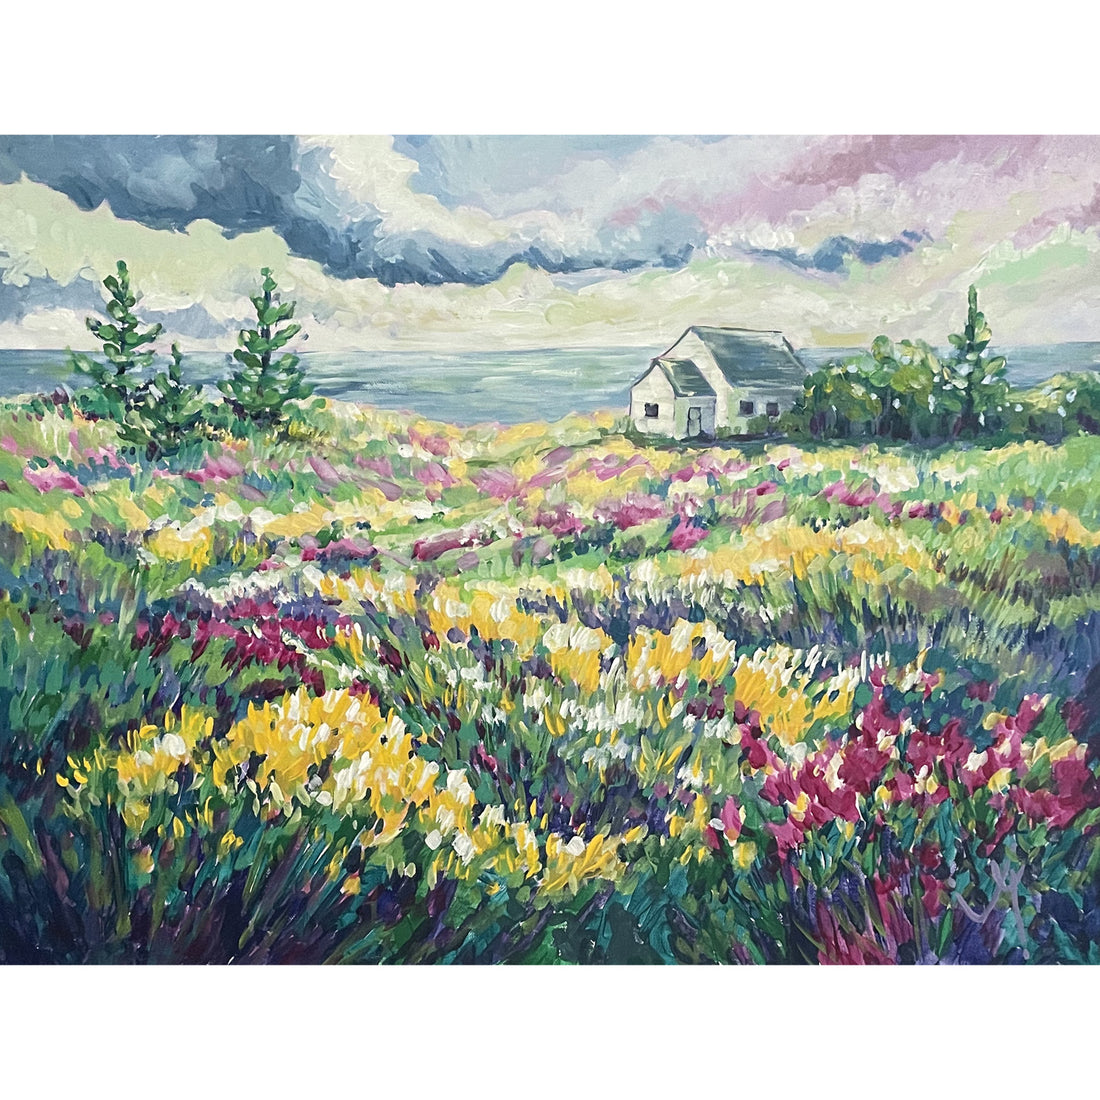 Joanne MacLennan "A Burning Within" landscape painting Canadian Artist